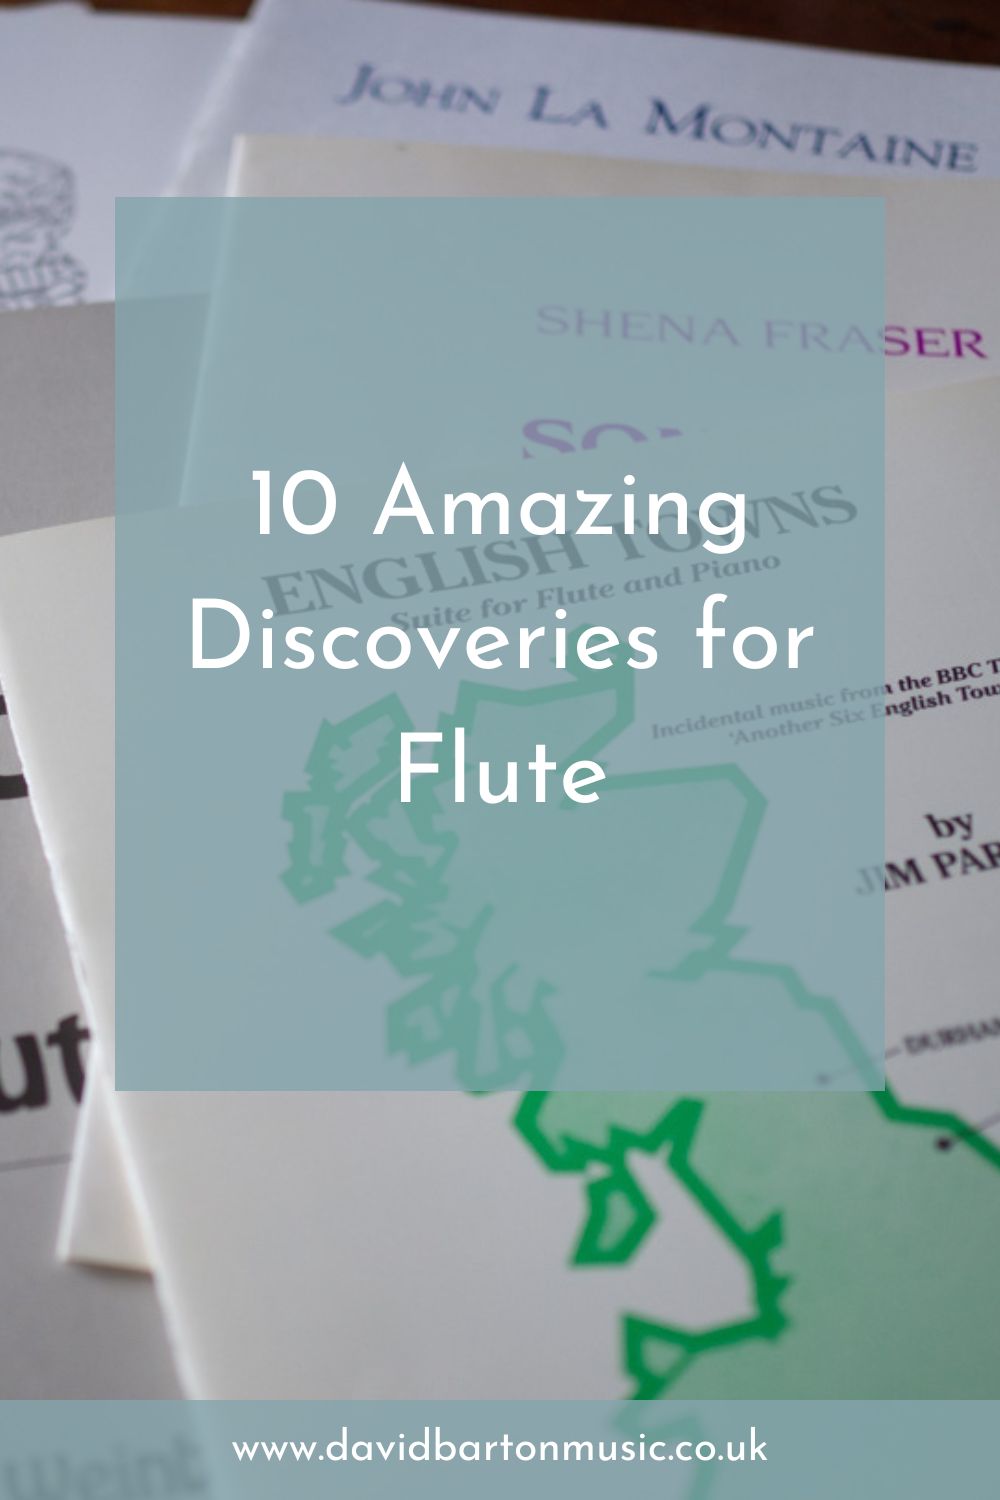 10 Amazing Discoveries for Flute (Pinterest Graphic)